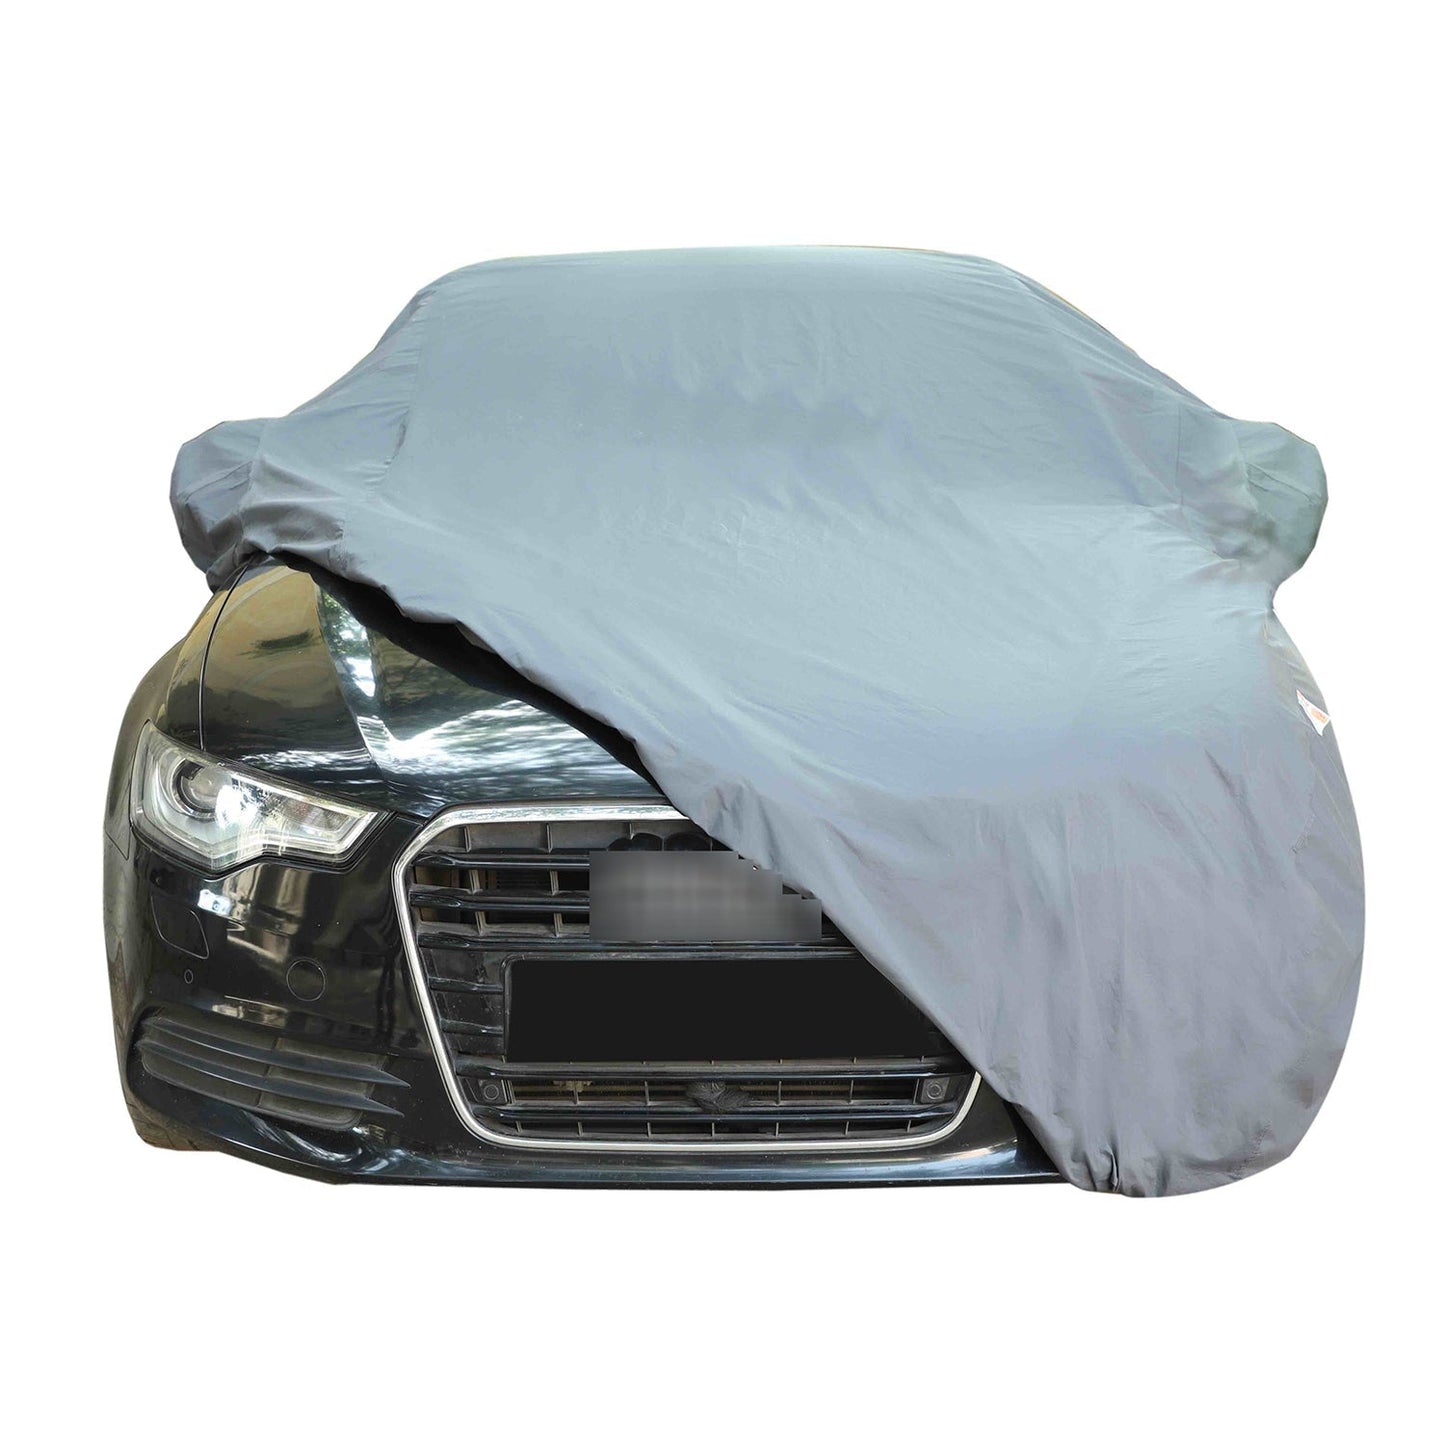 Oshotto Dark Grey 100% Anti Reflective, dustproof and Water Proof Car Body Cover with Mirror Pocket For Nissan Terrano